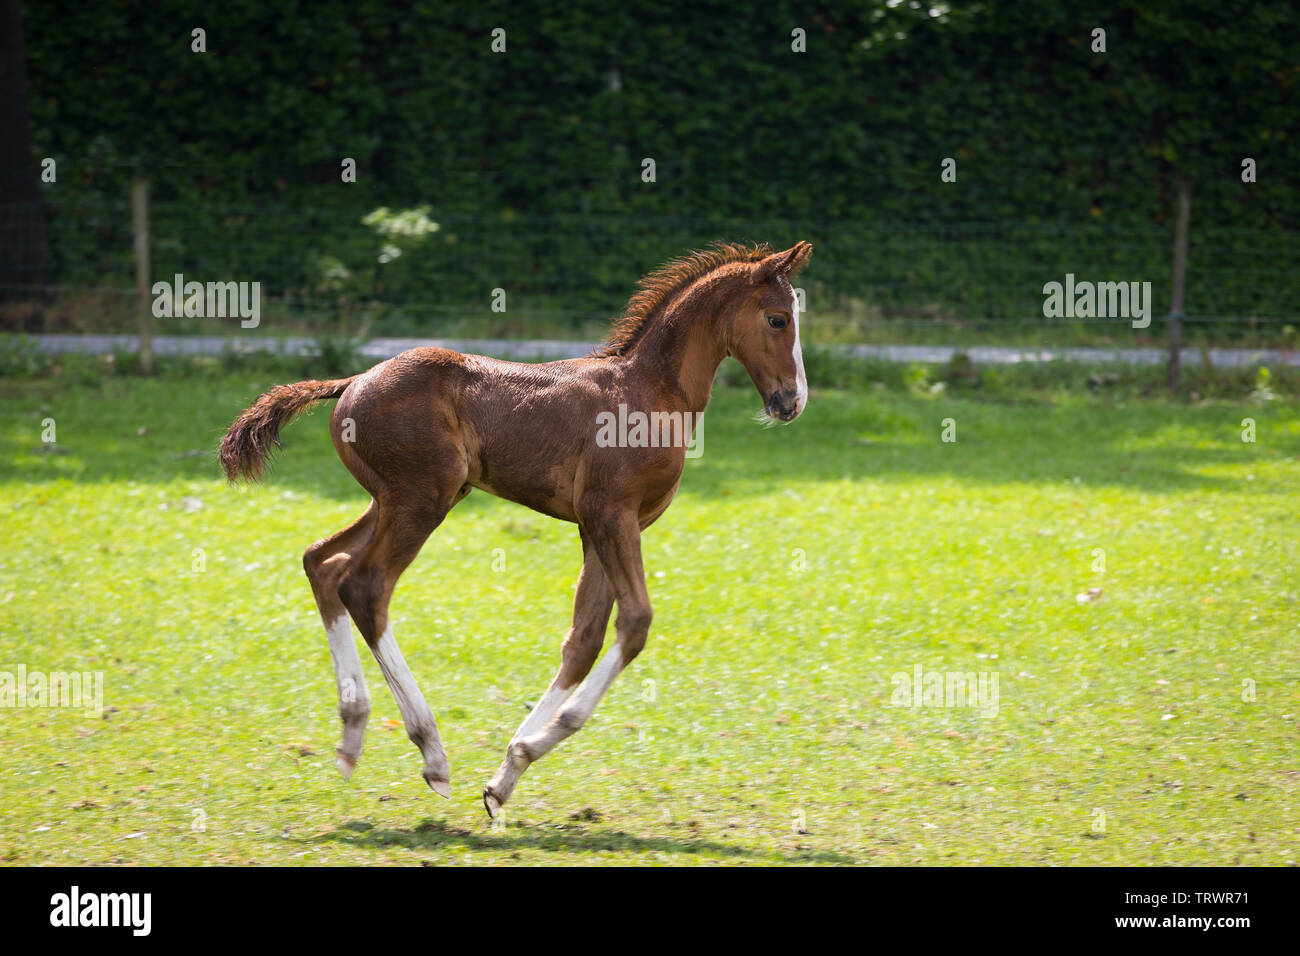 Playful young foal running in a meadow outdoors Stock Photo